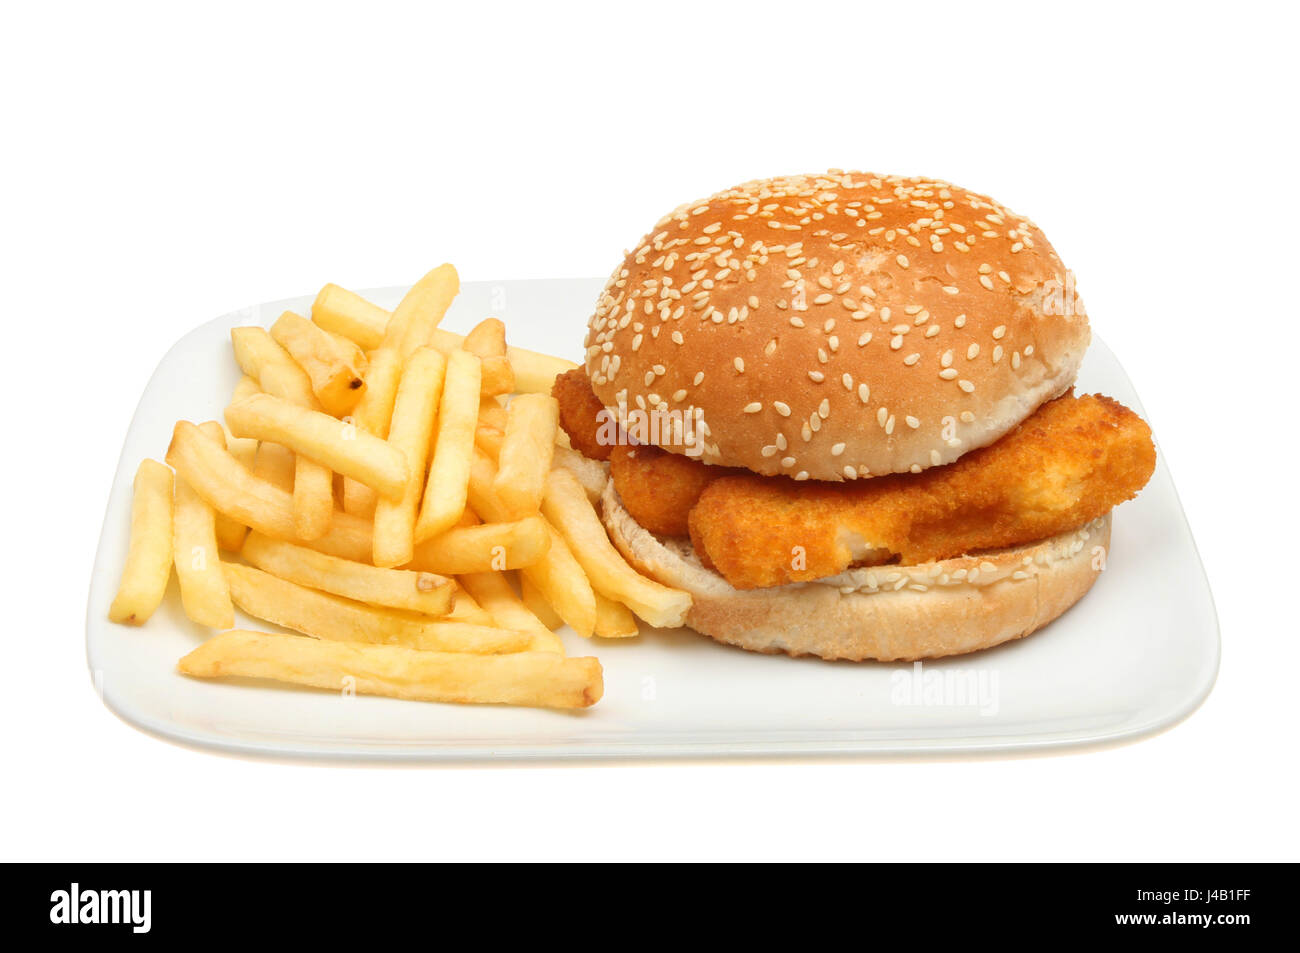 Fish burger, fish fingers in a burger bun with French fries on a plate isolated against white Stock Photo